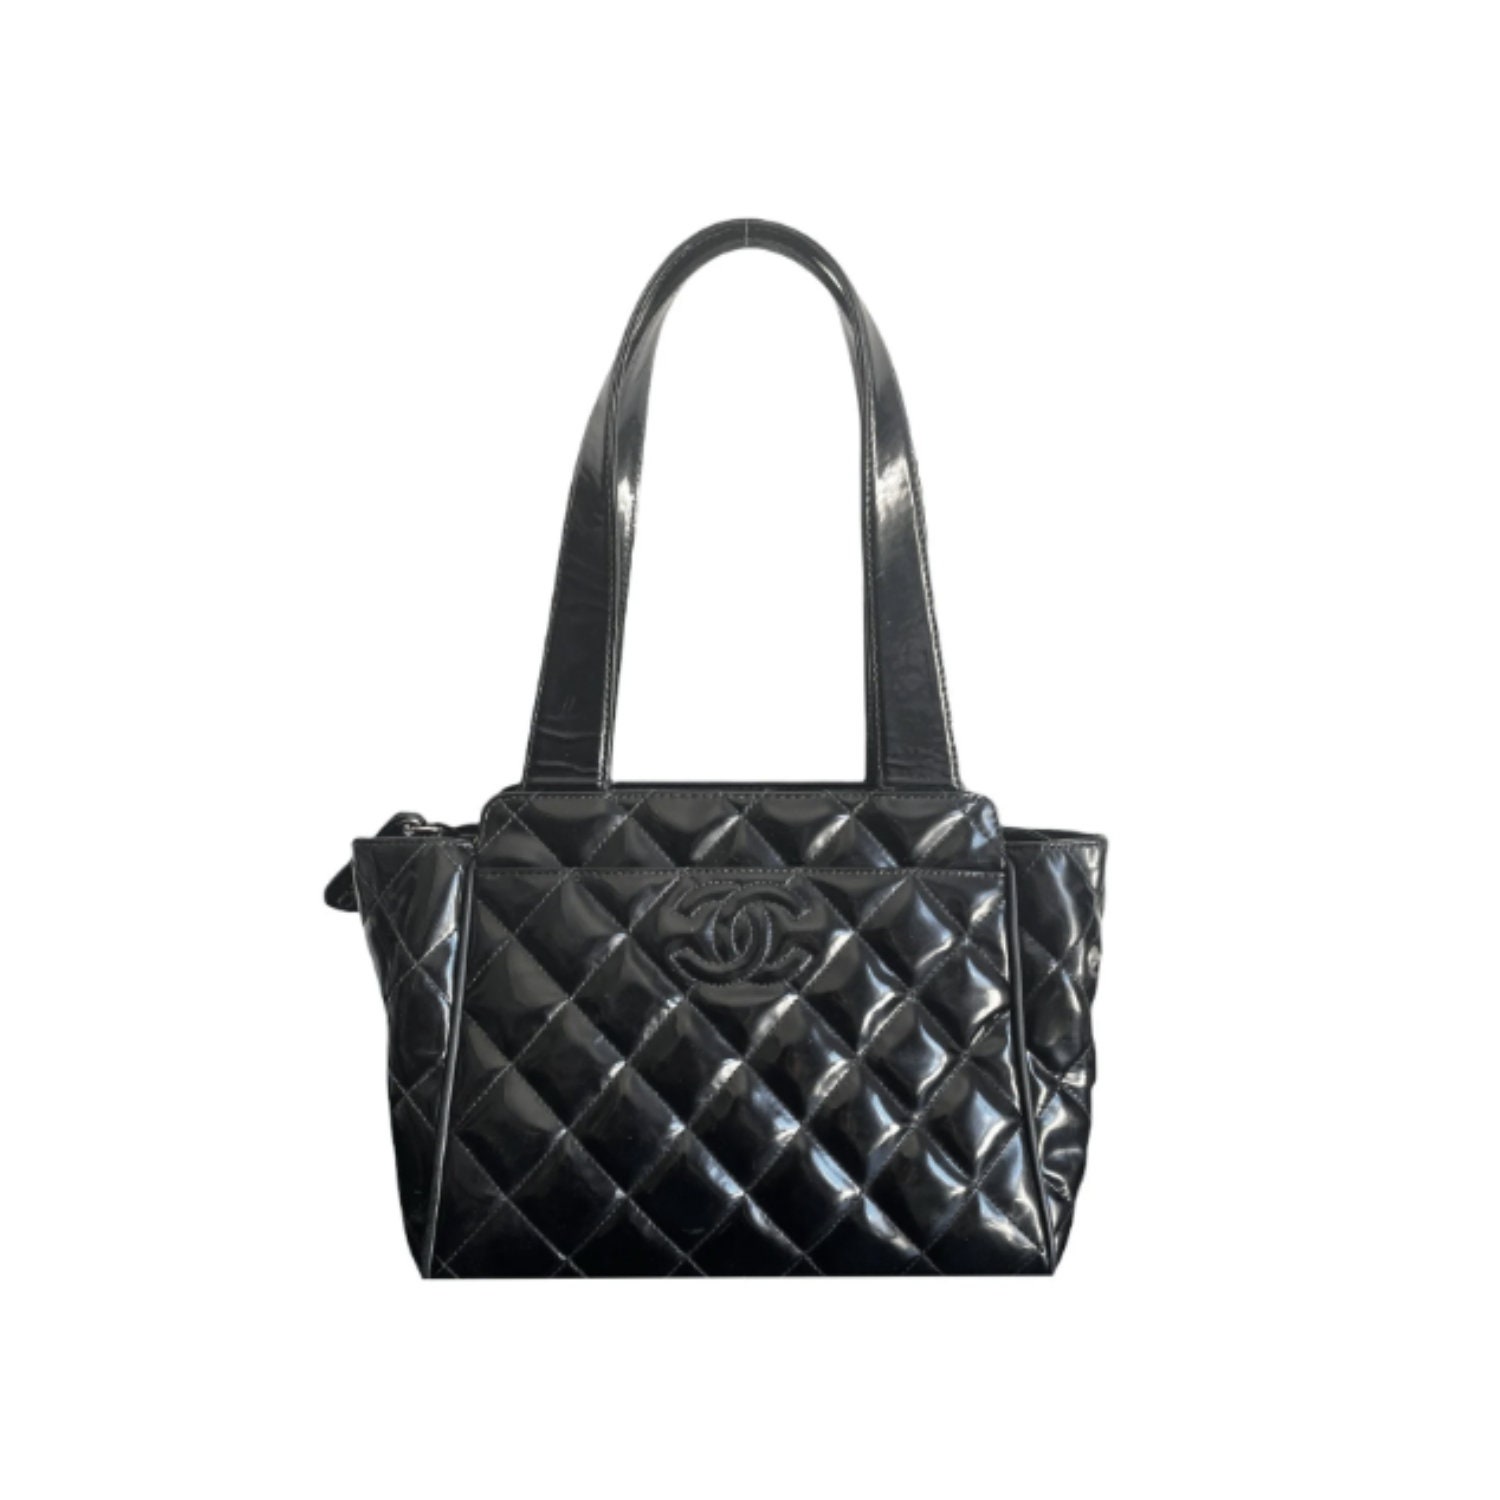 Authentic Vintage CHANEL In Women's Bags & Handbags for sale